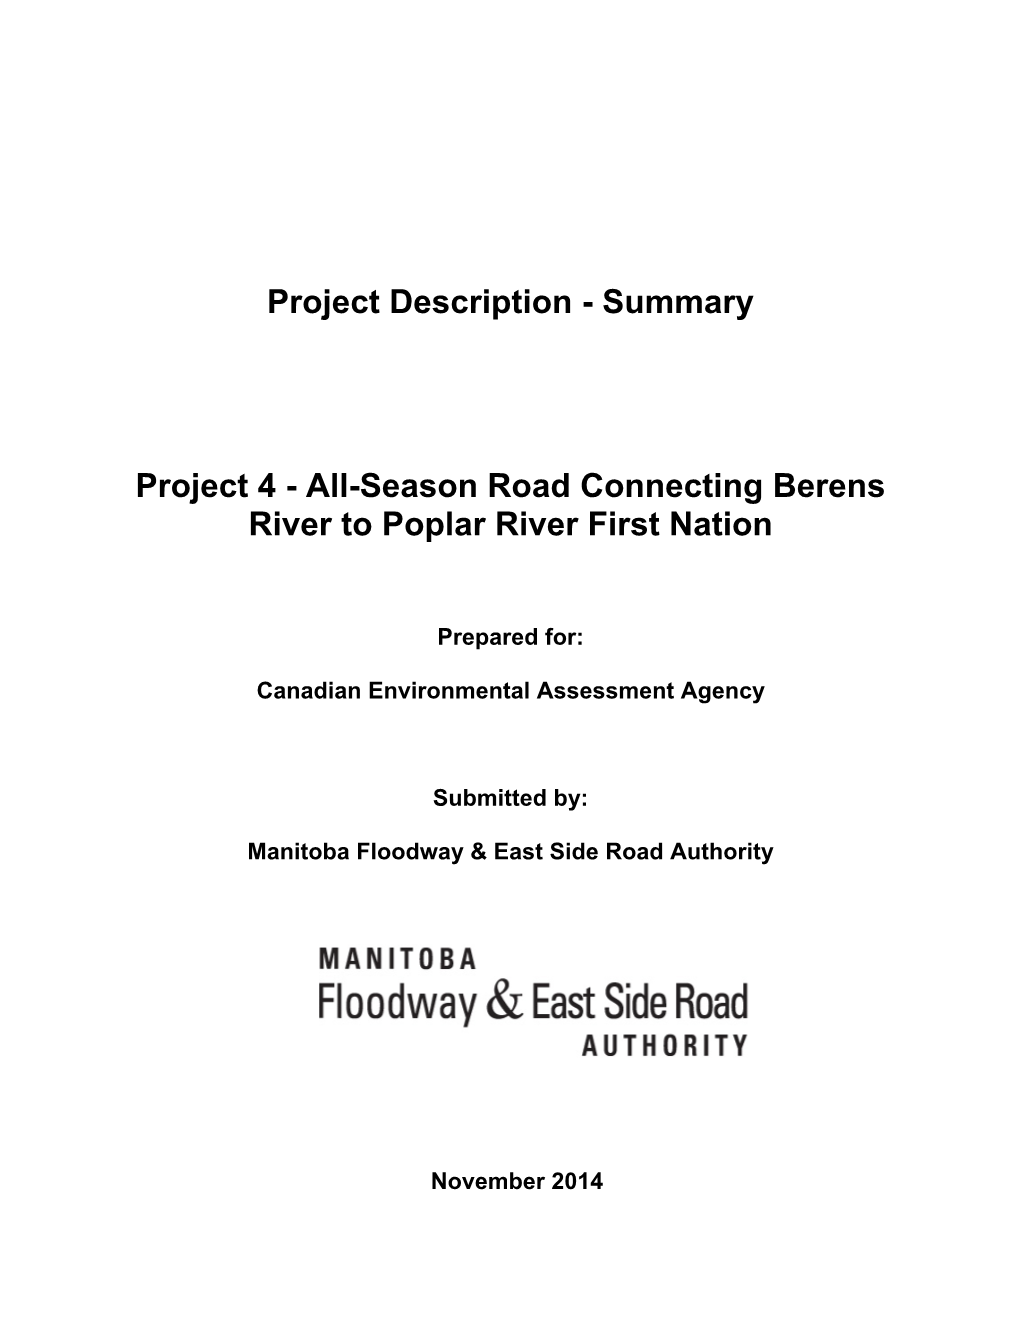 All-Season Road Connecting Berens River to Poplar River First Nation